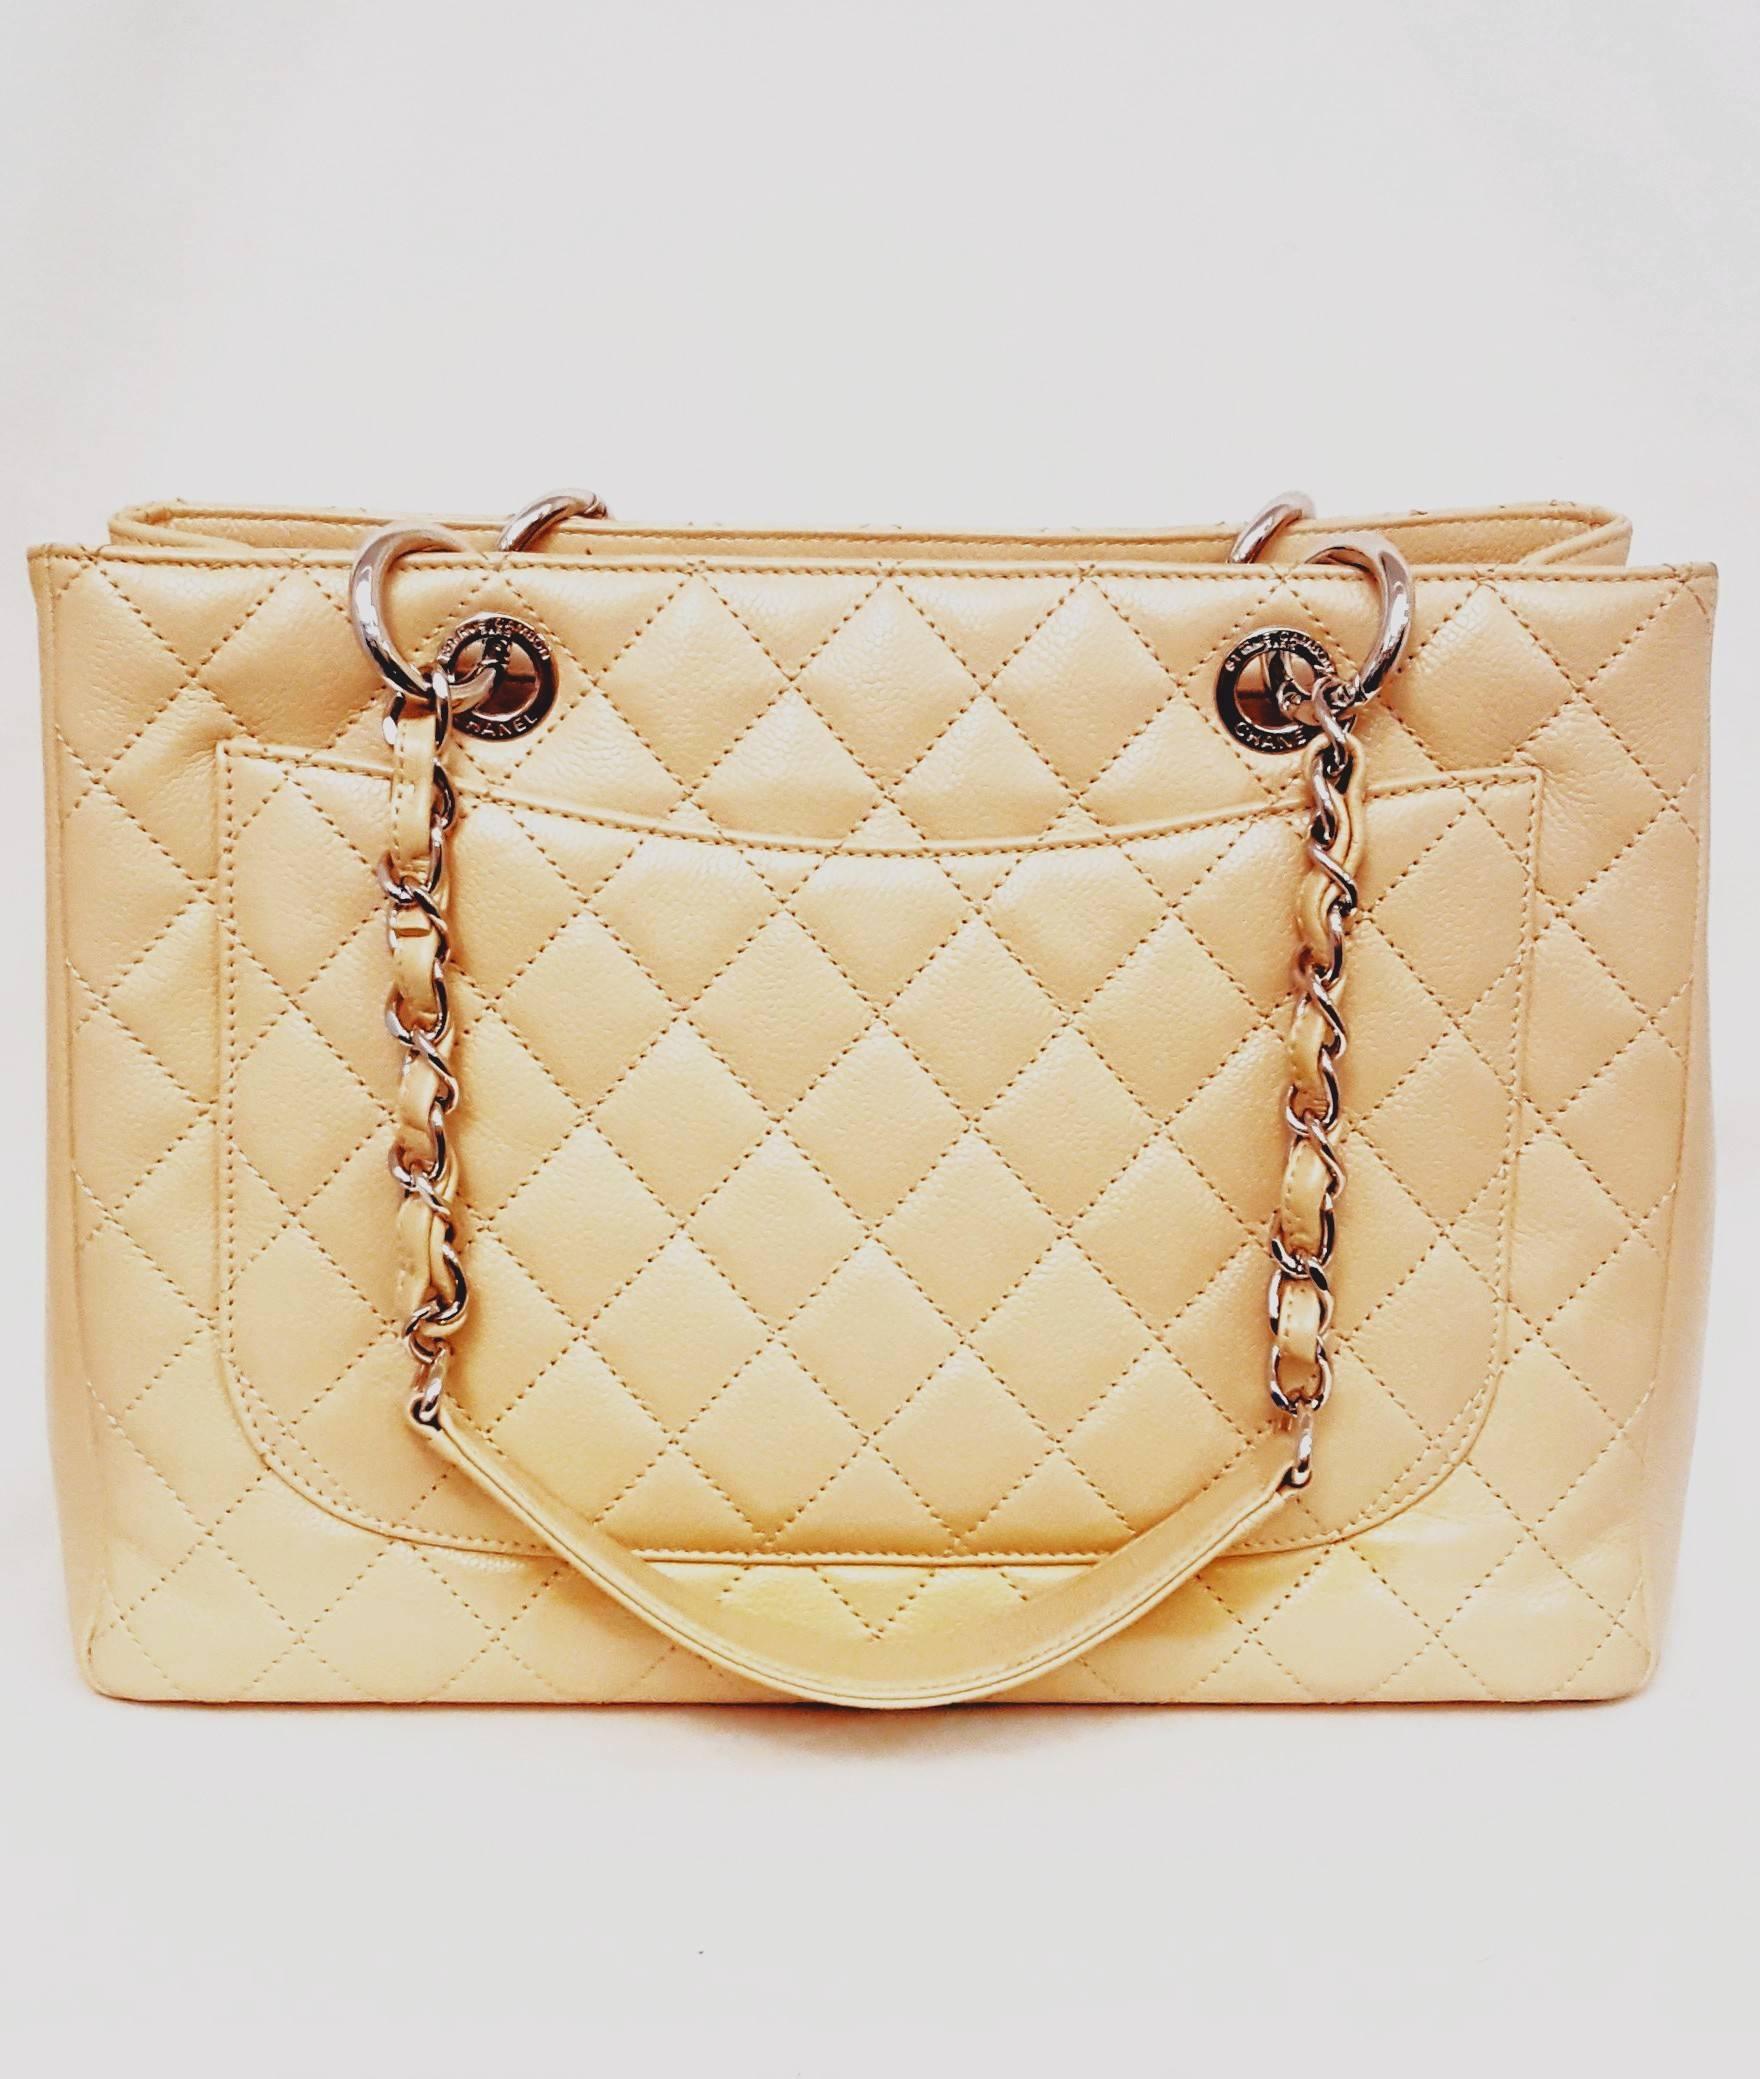 Beige Chanel Tan Caviar Leather Grand Shopping Tote Bag  For Sale